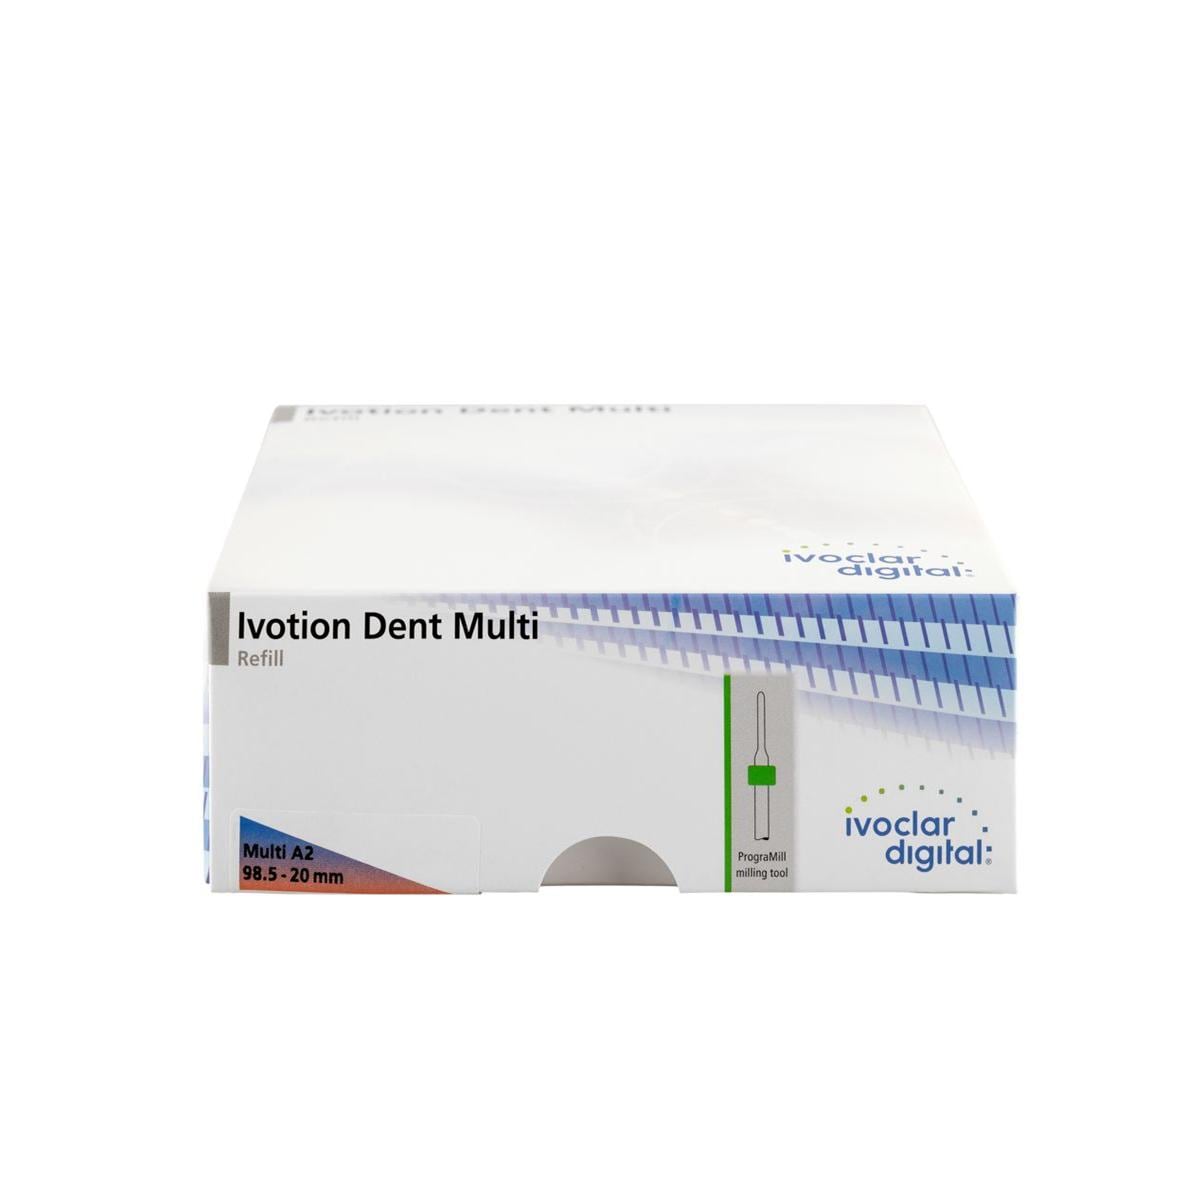 Ivotion Dent Multi A2 98.5x20mm